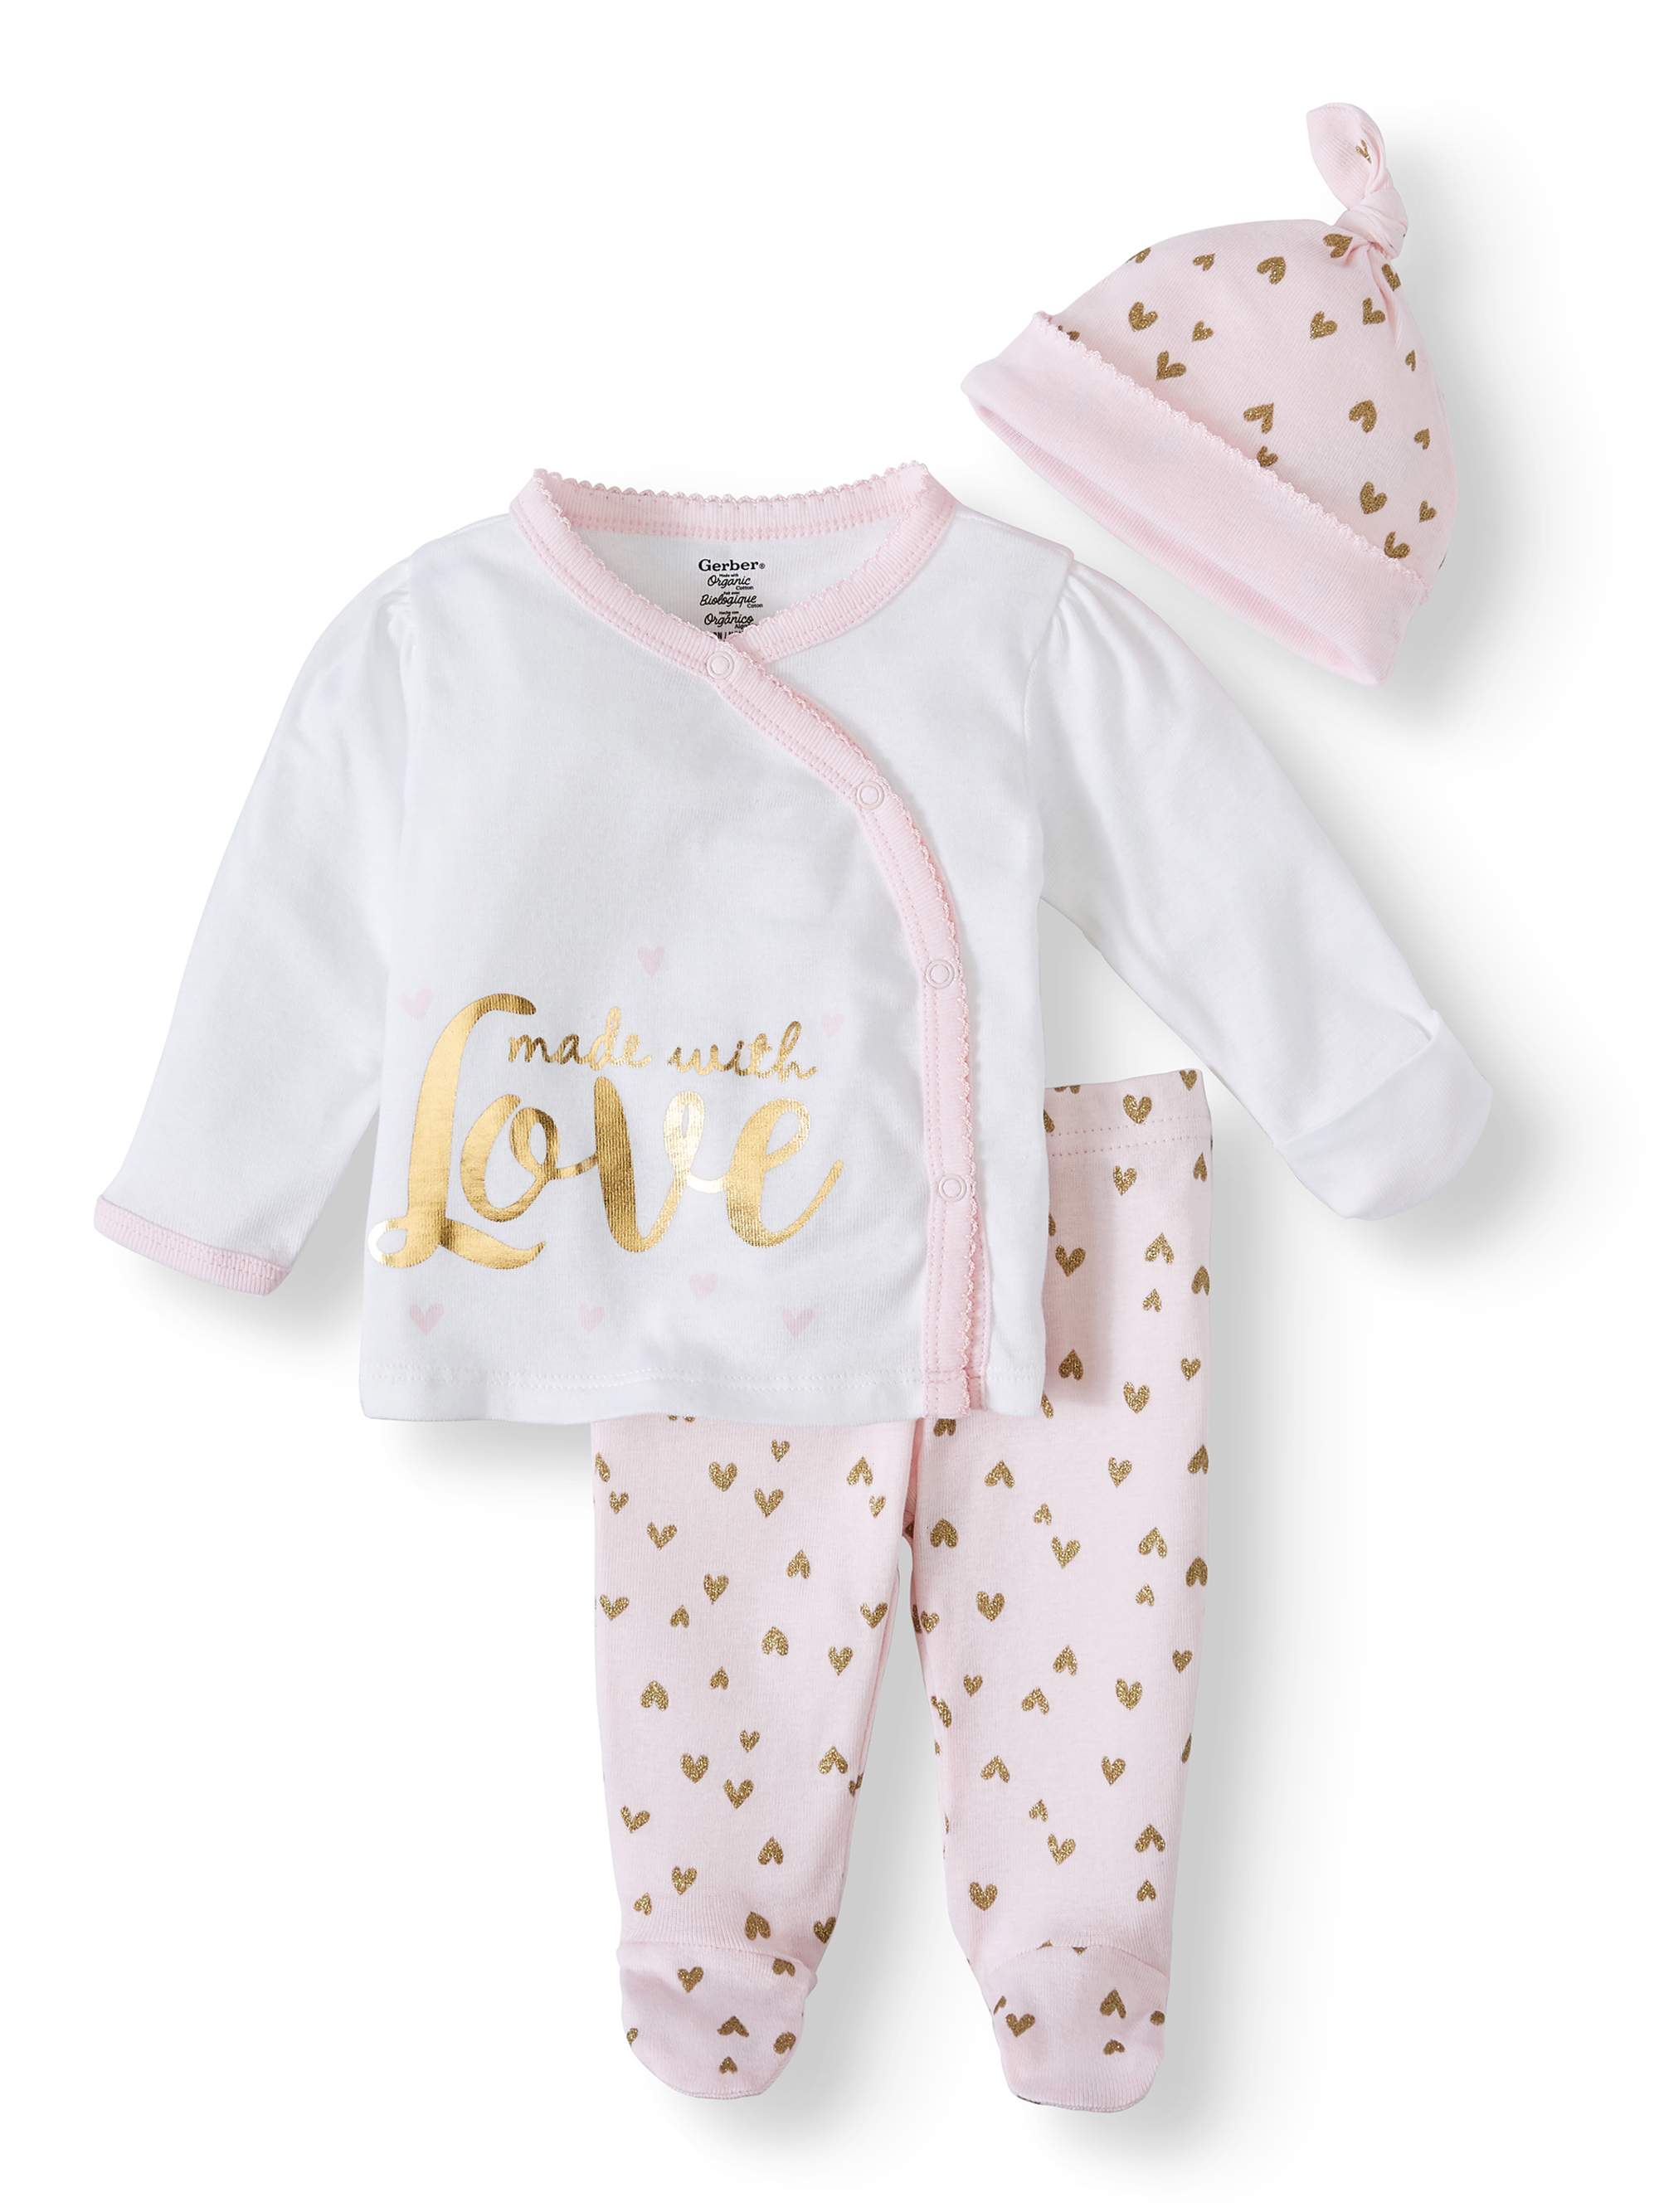 Gerber Organic Cotton Take Me Home Outfit Set, 3pc (Baby Girls)